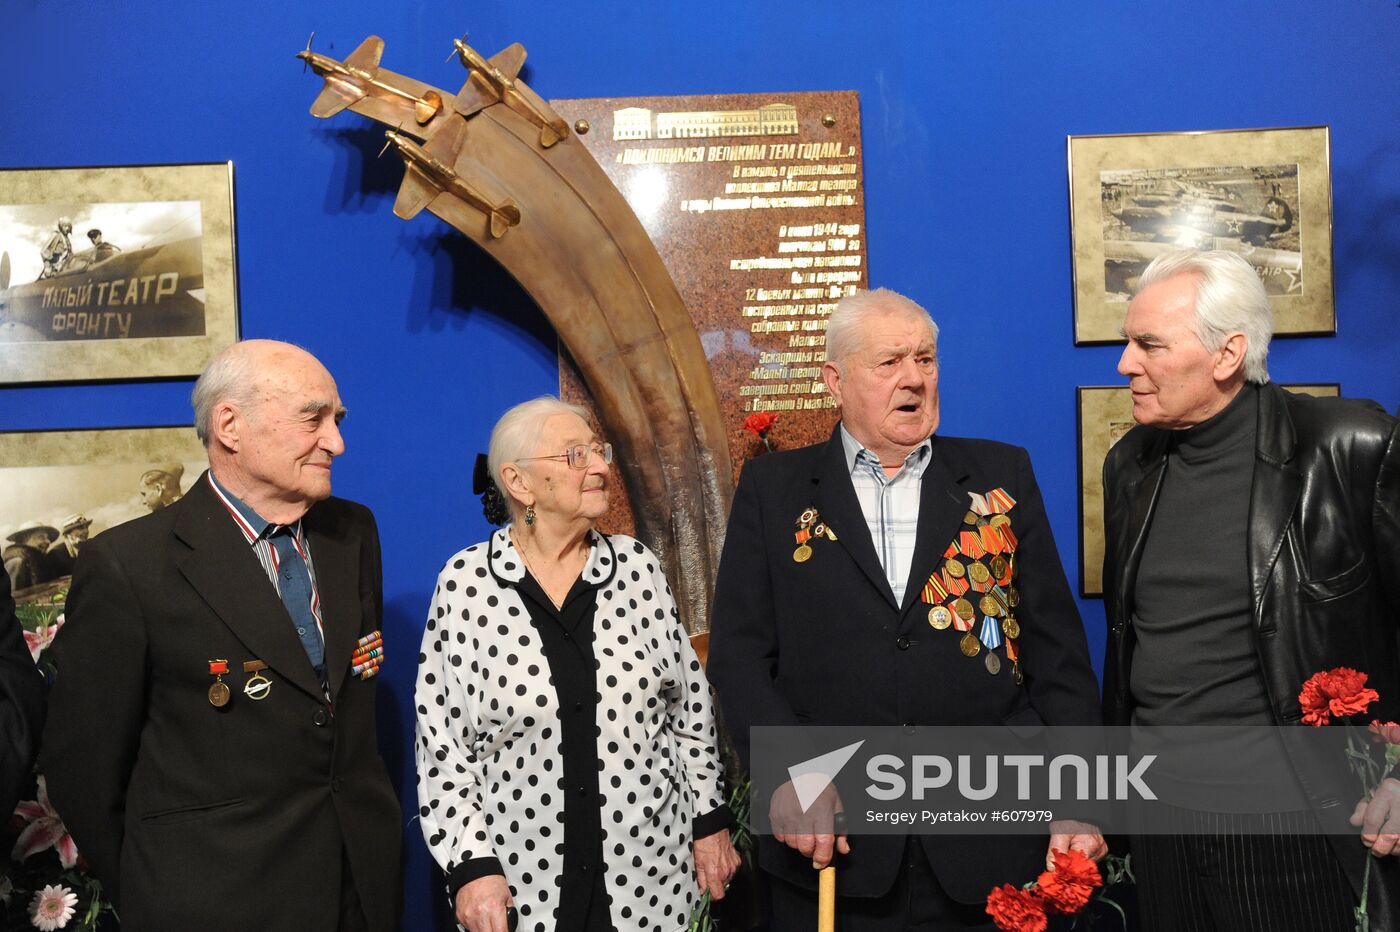 Opening ceremony of commemorative plaque at Maly Theater